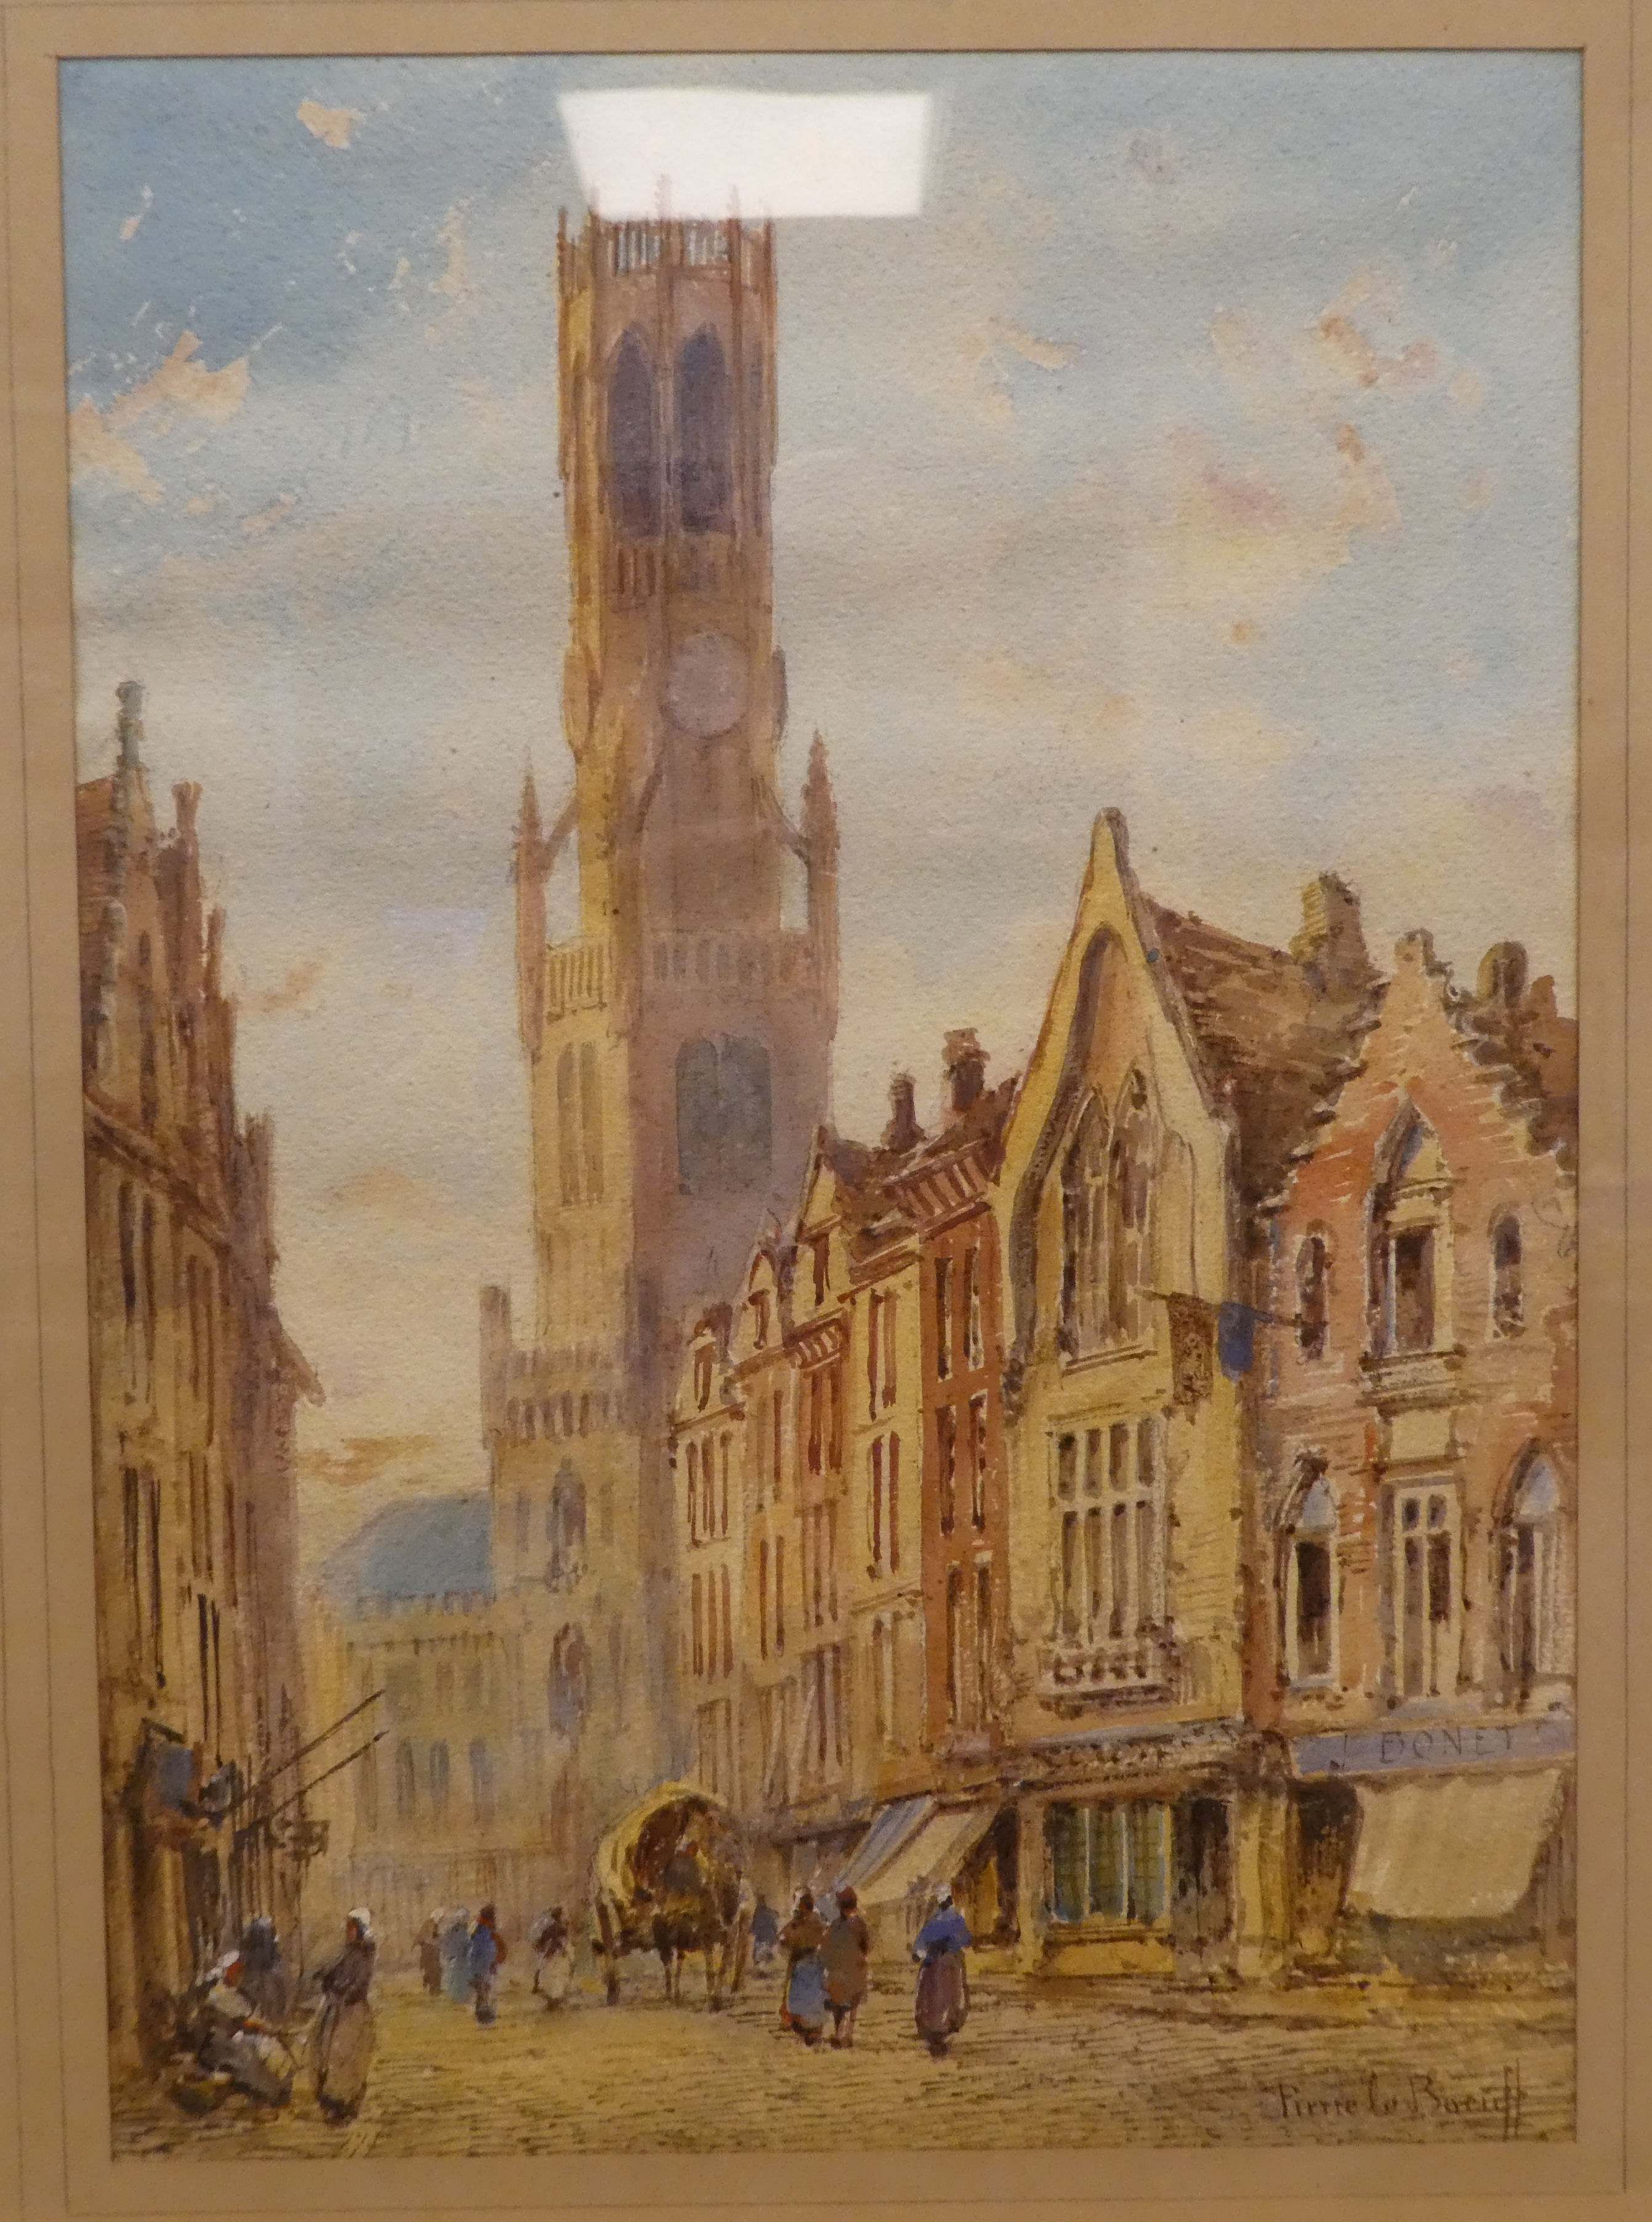 Pierre le Boeuff - two European street scenes  watercolours  bears signatures  10" x 14"  both - Image 4 of 7